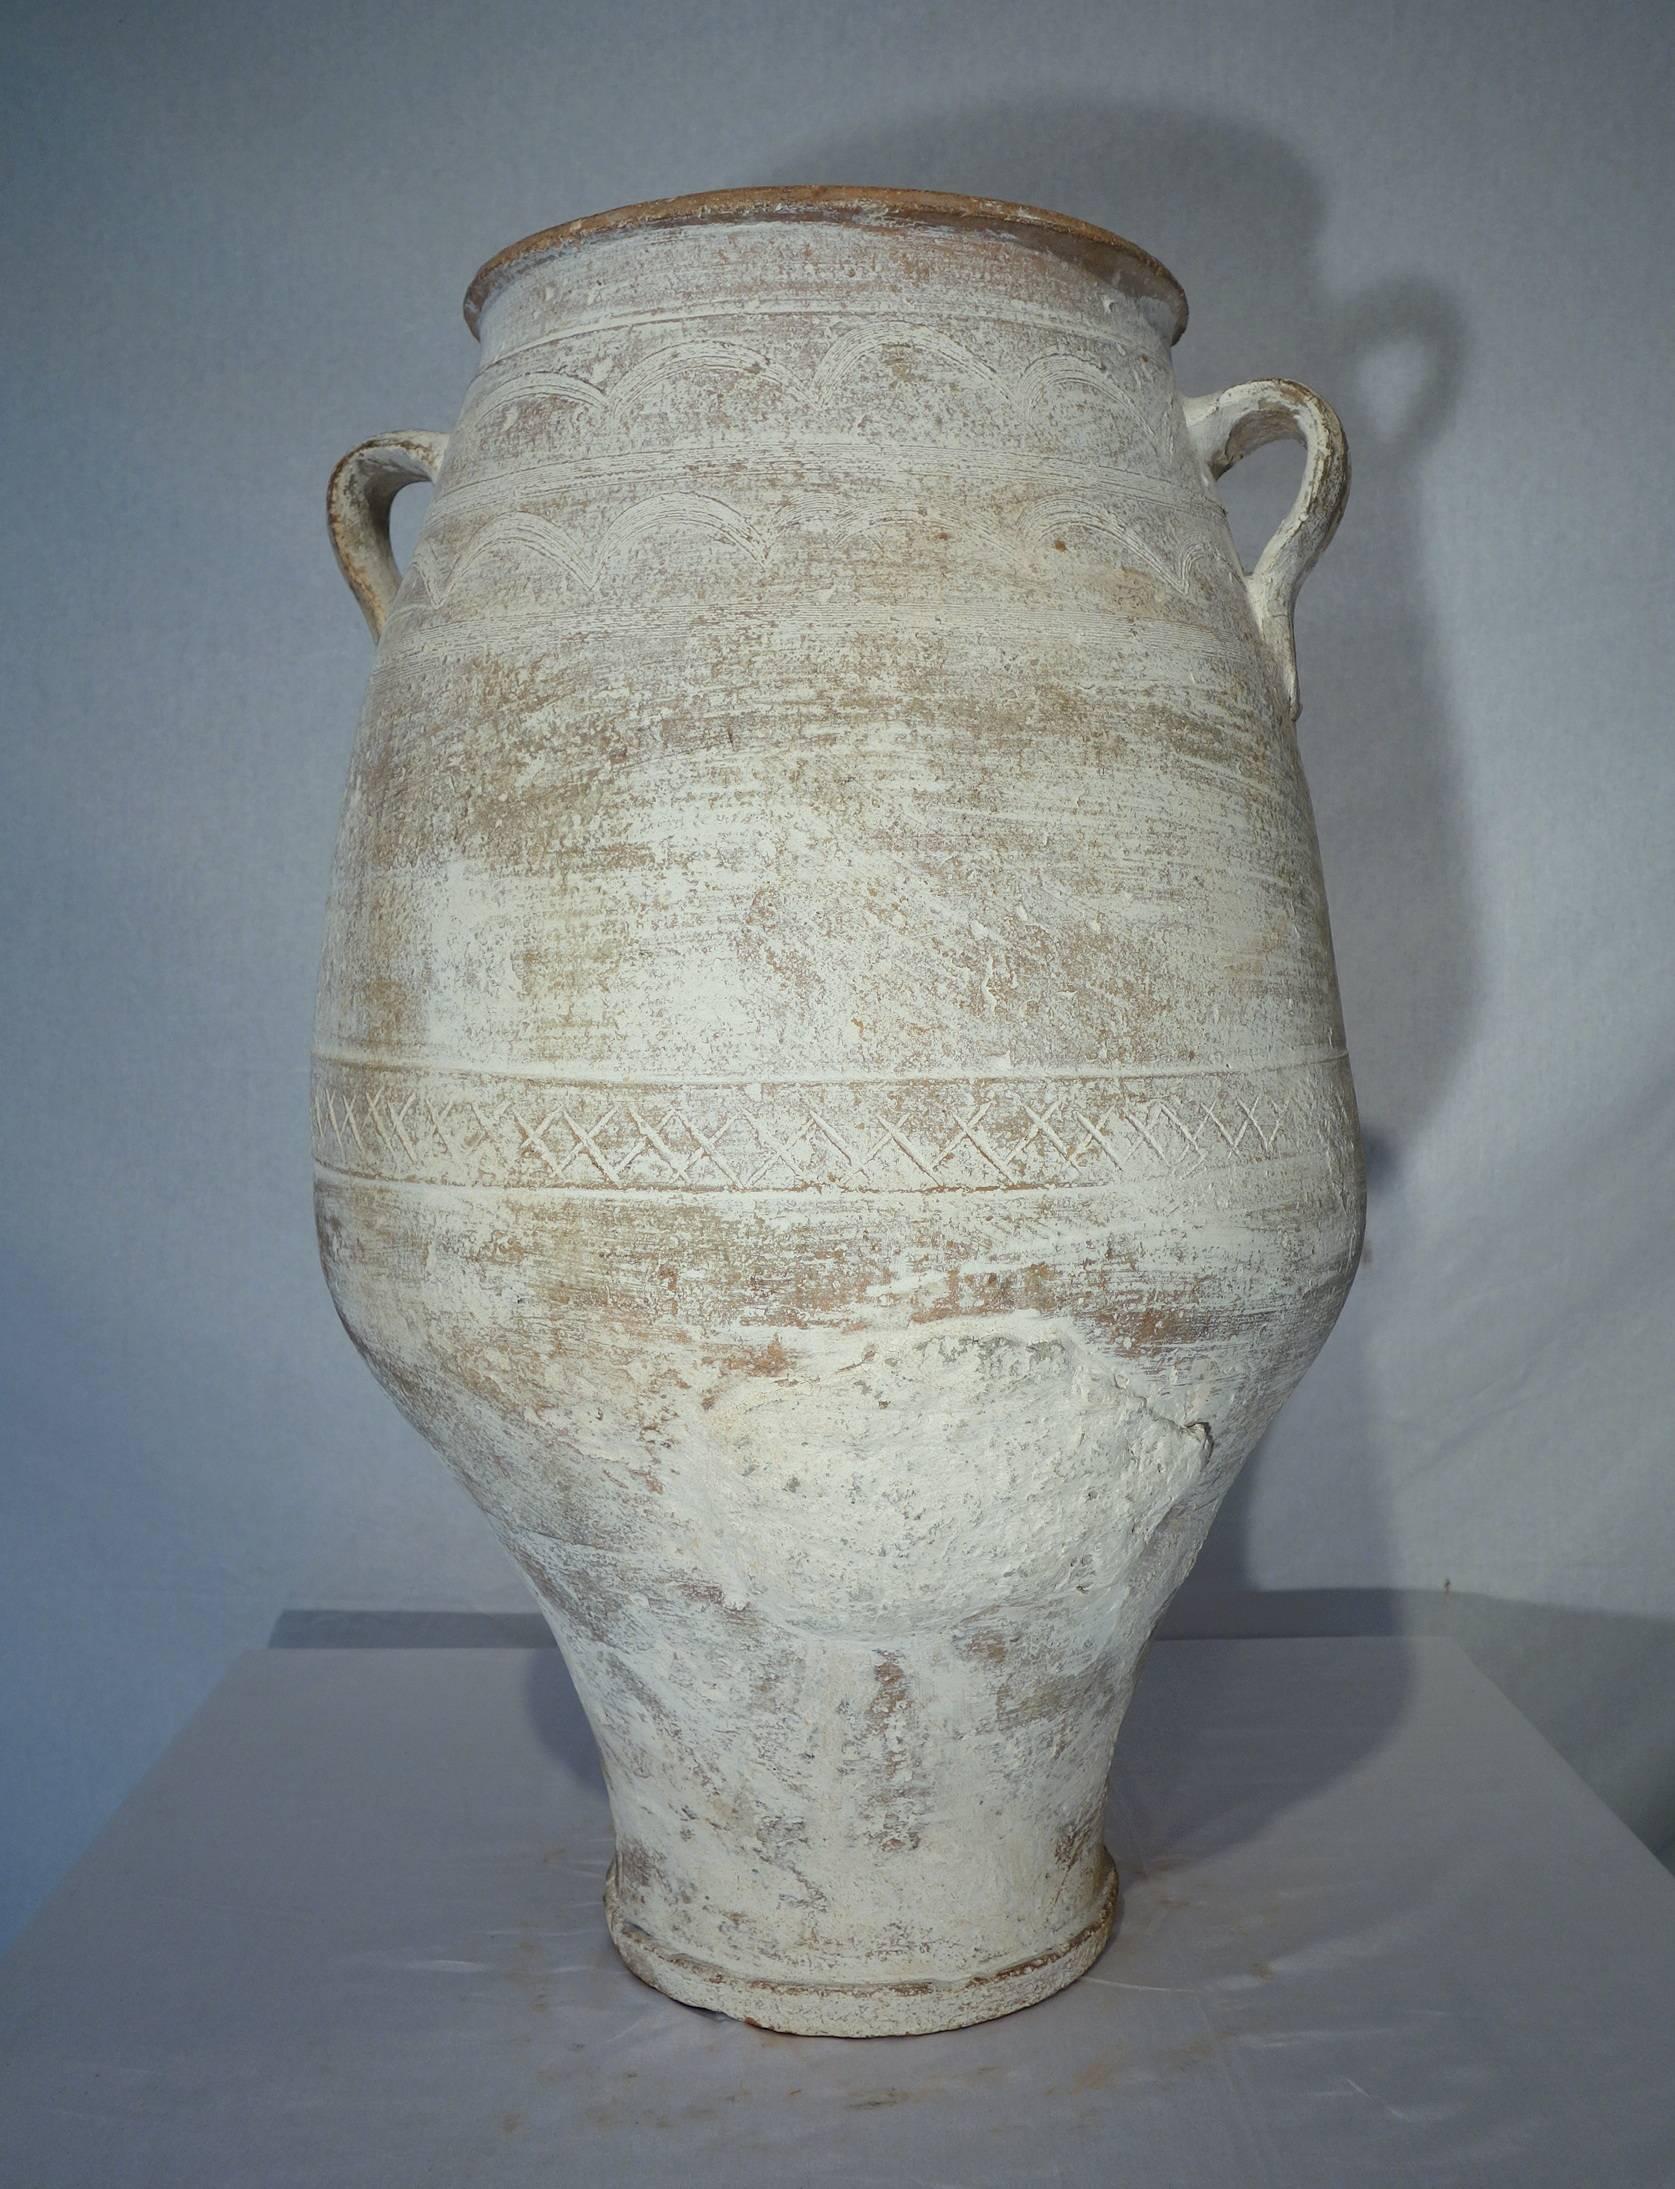 Simple line 19th century Greek water ampora wonderful white lime patina, it was once used as storage and shipping jars for water. Tapered shape toward the bottom with geometric and midline scoring. Heavy white patina.